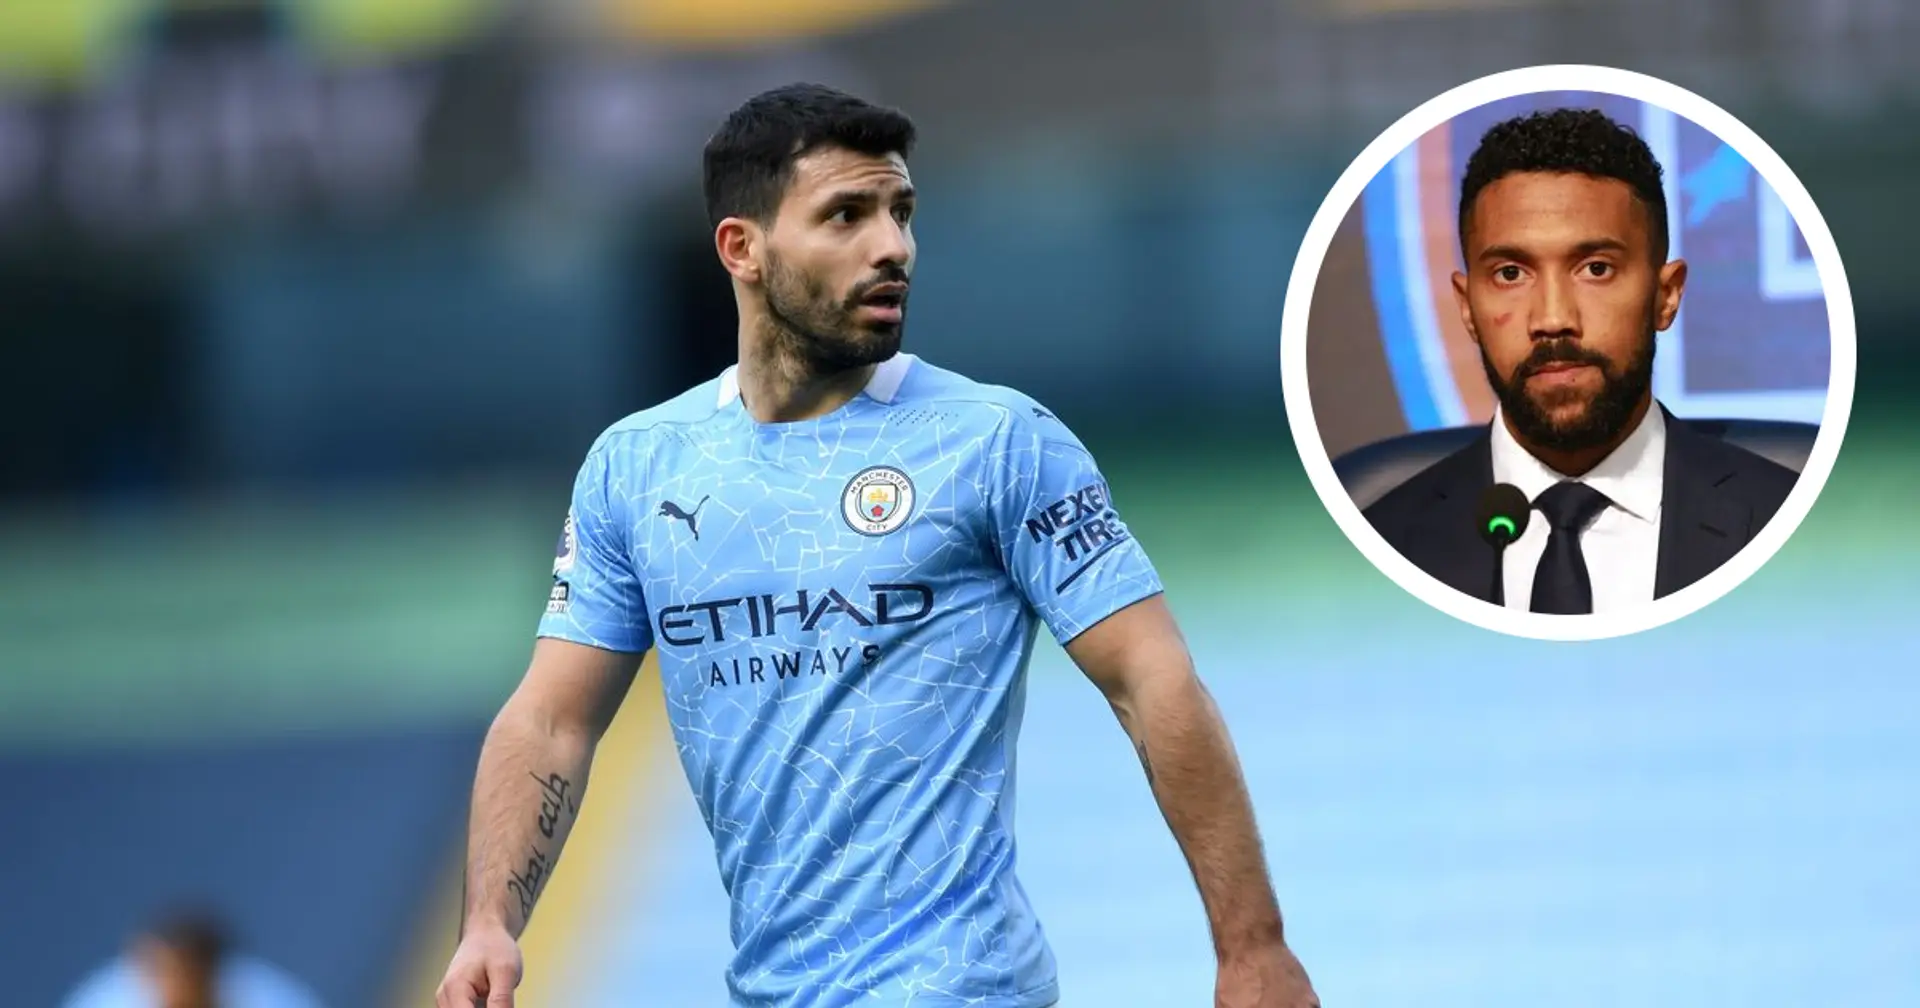 'I think Arsenal is a good fit': Gael Clichy backs Aguero to seal Emirates move